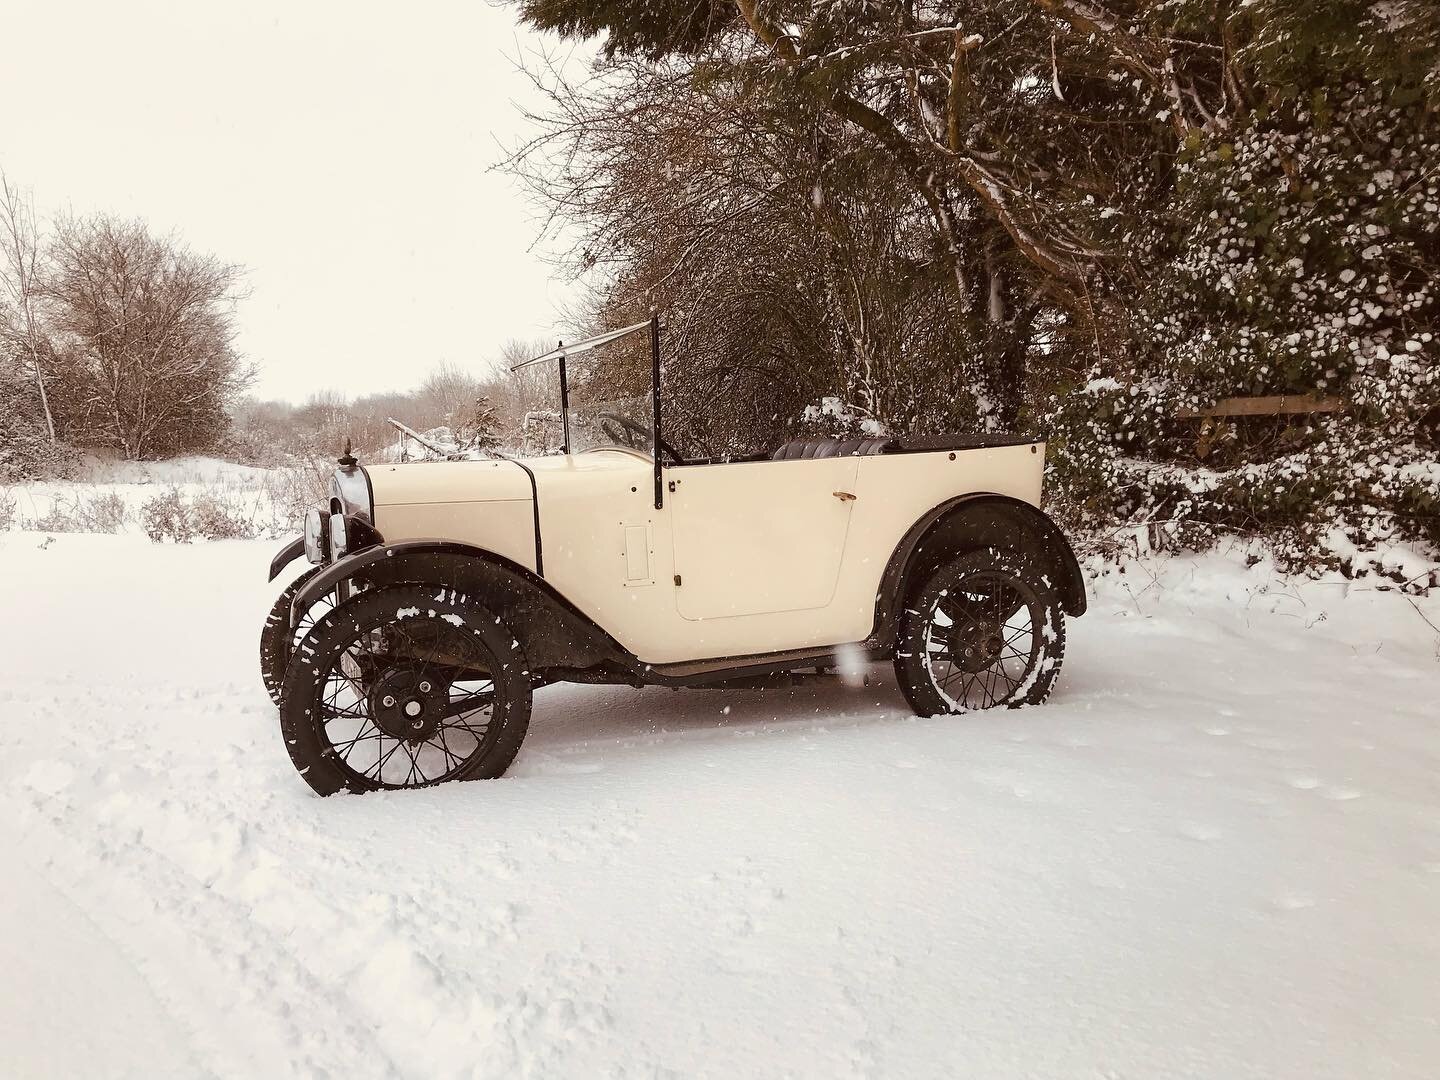 Wishing all our clients, staff and followers a very Merry Christmas and a Happy New Year. We look forward to seeing you all in 2023! #christmas #akvr_uk #vscc #vintagerestoration #restoration #snow #classiccar #vintagecarsofinstagram